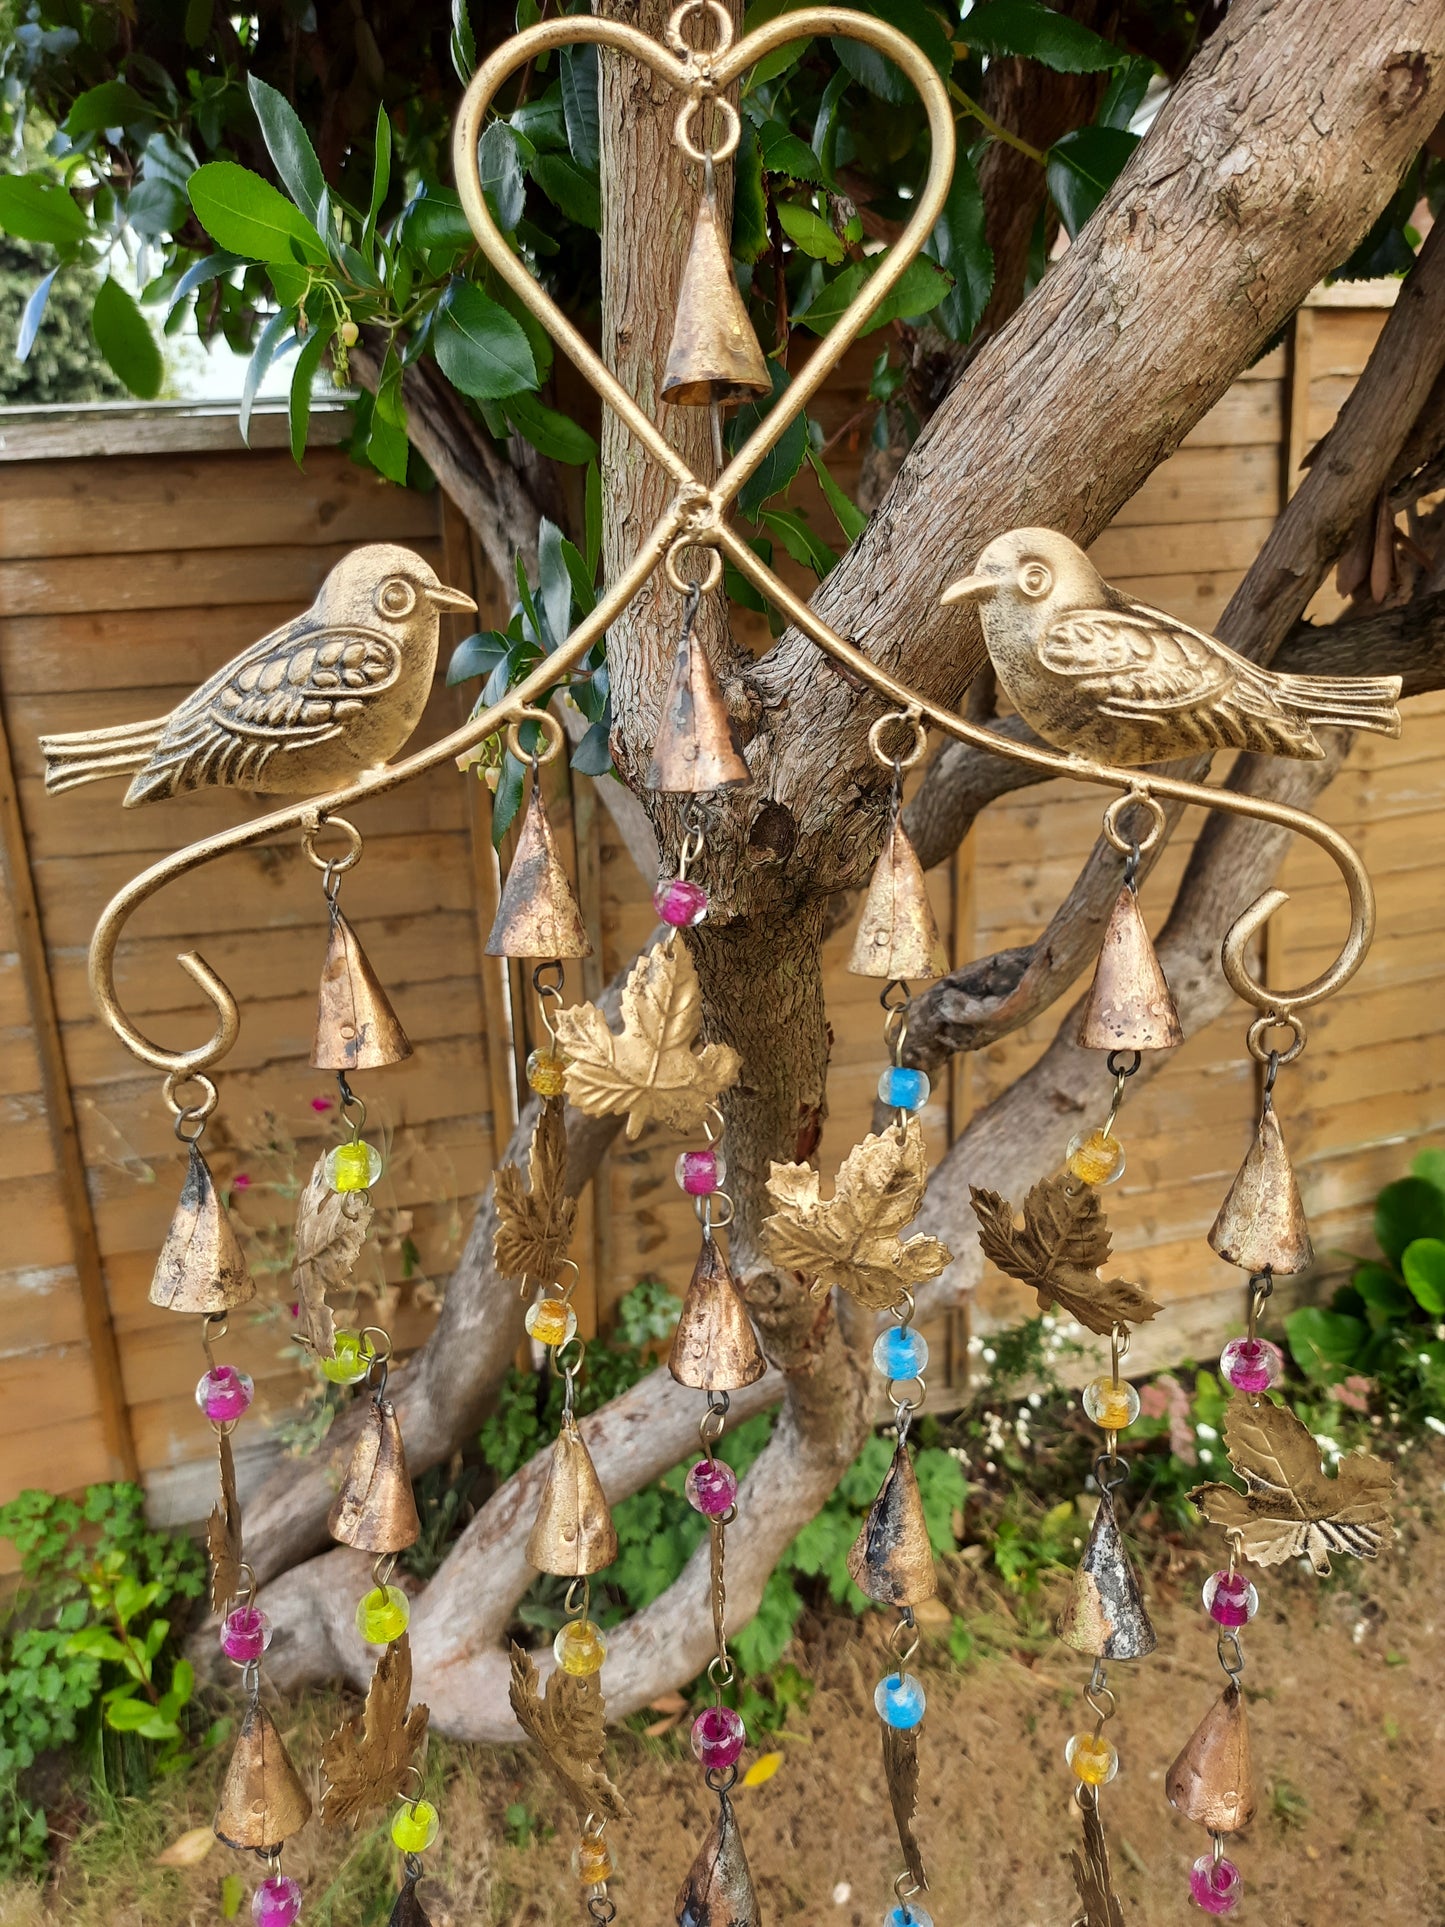 Fair Trade Wind Chime | Ethical Gifts | Birds | Eco Friendly Companies | Wind Chimes